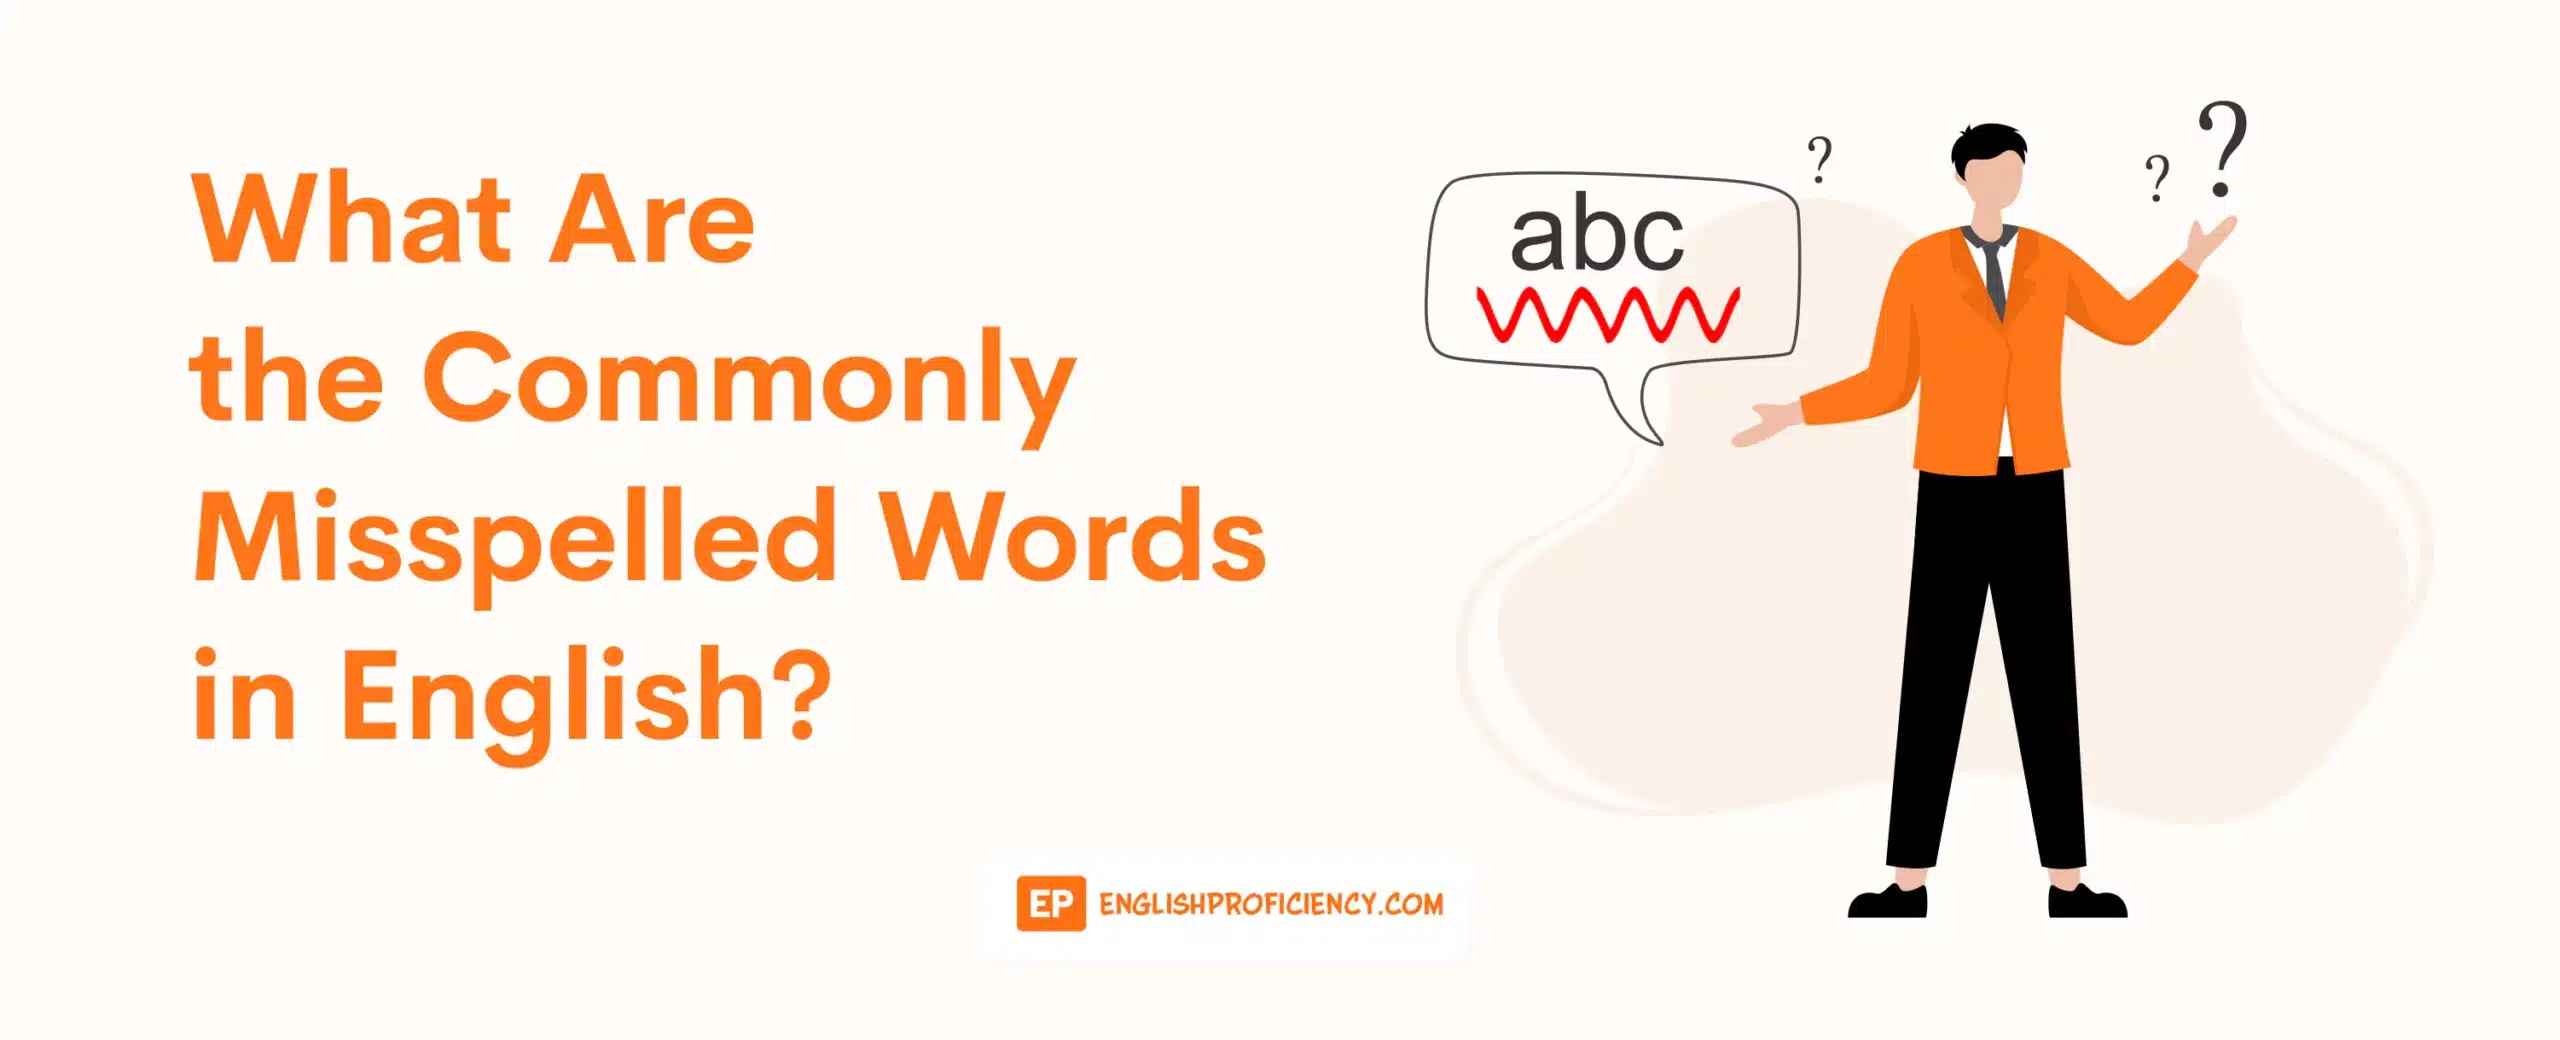 What are the Commonly Misspelled Words in English